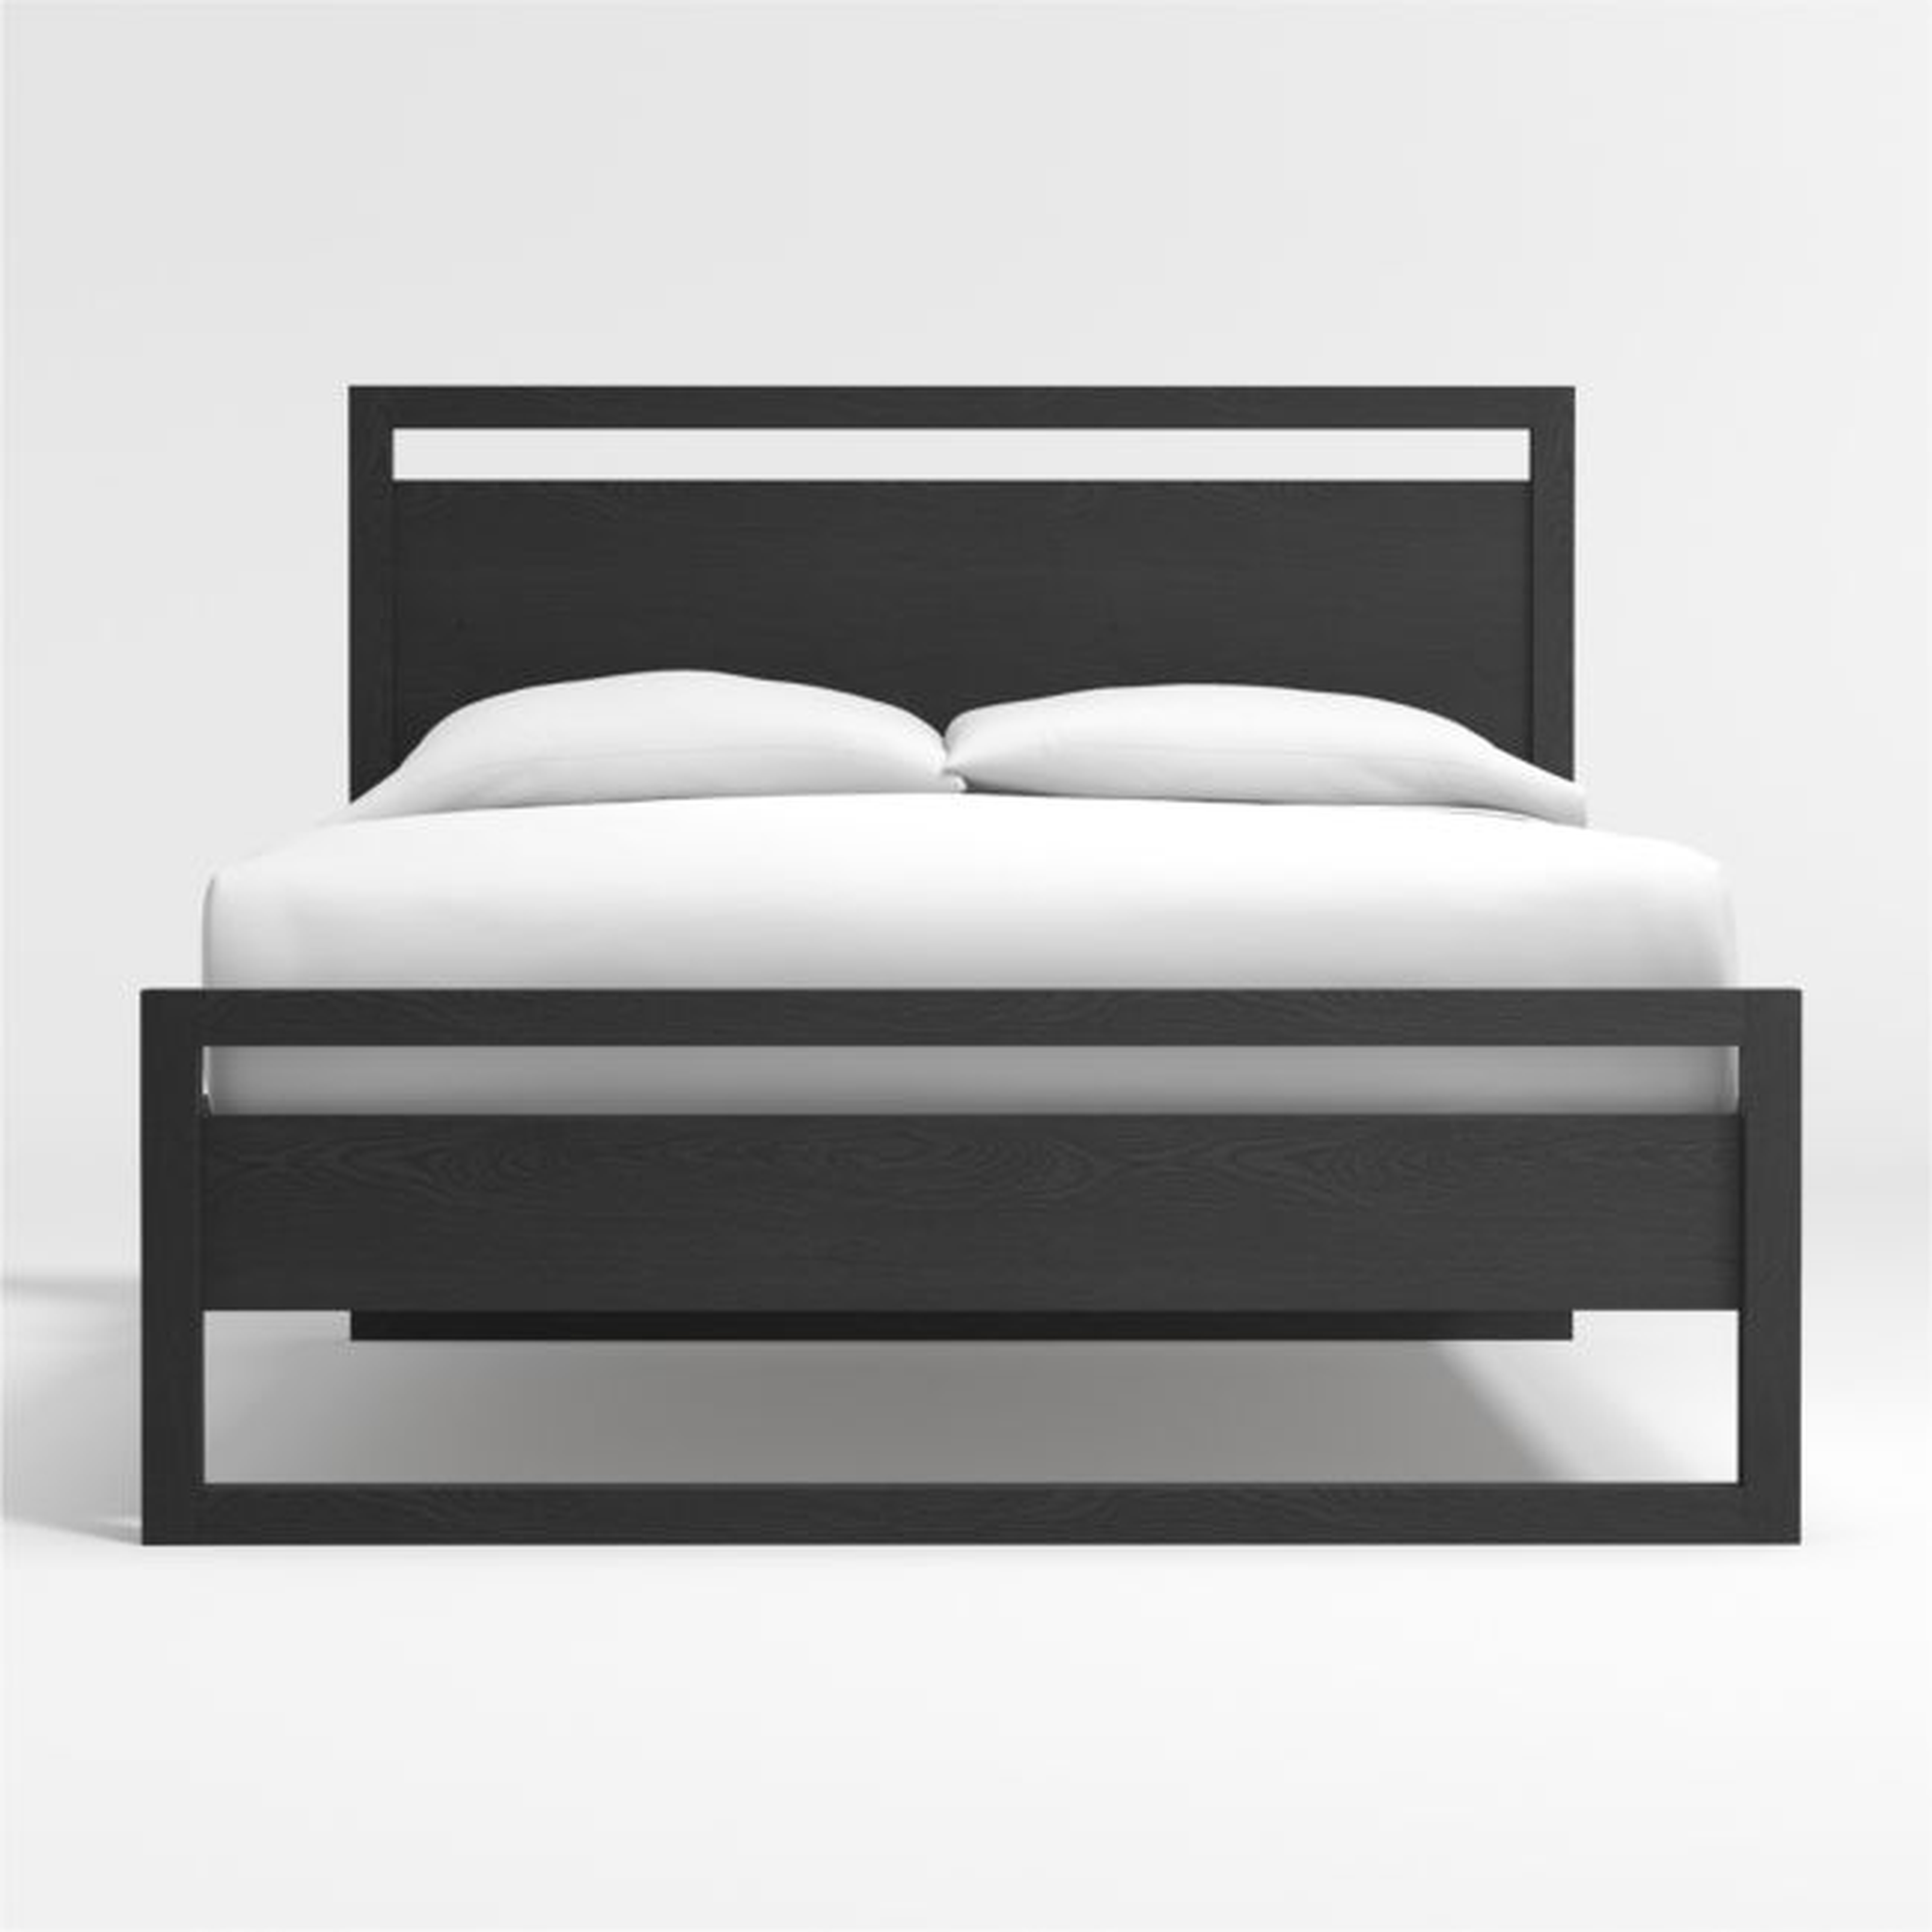 Linea Black Full Bed - Crate and Barrel